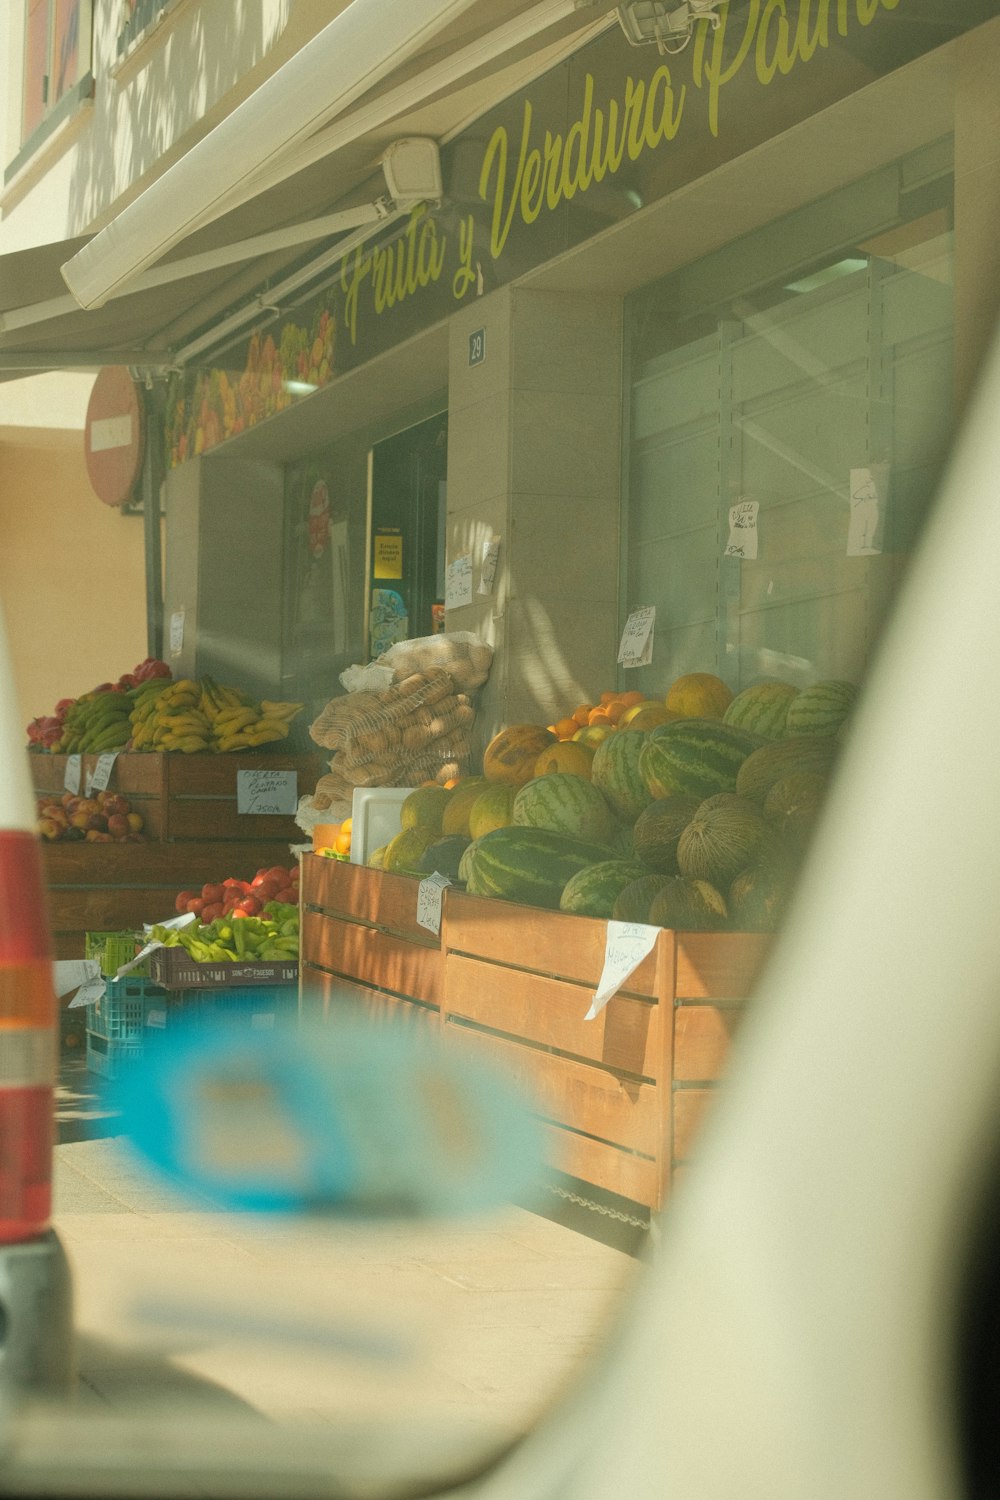 a view of a fruit stand through a car window